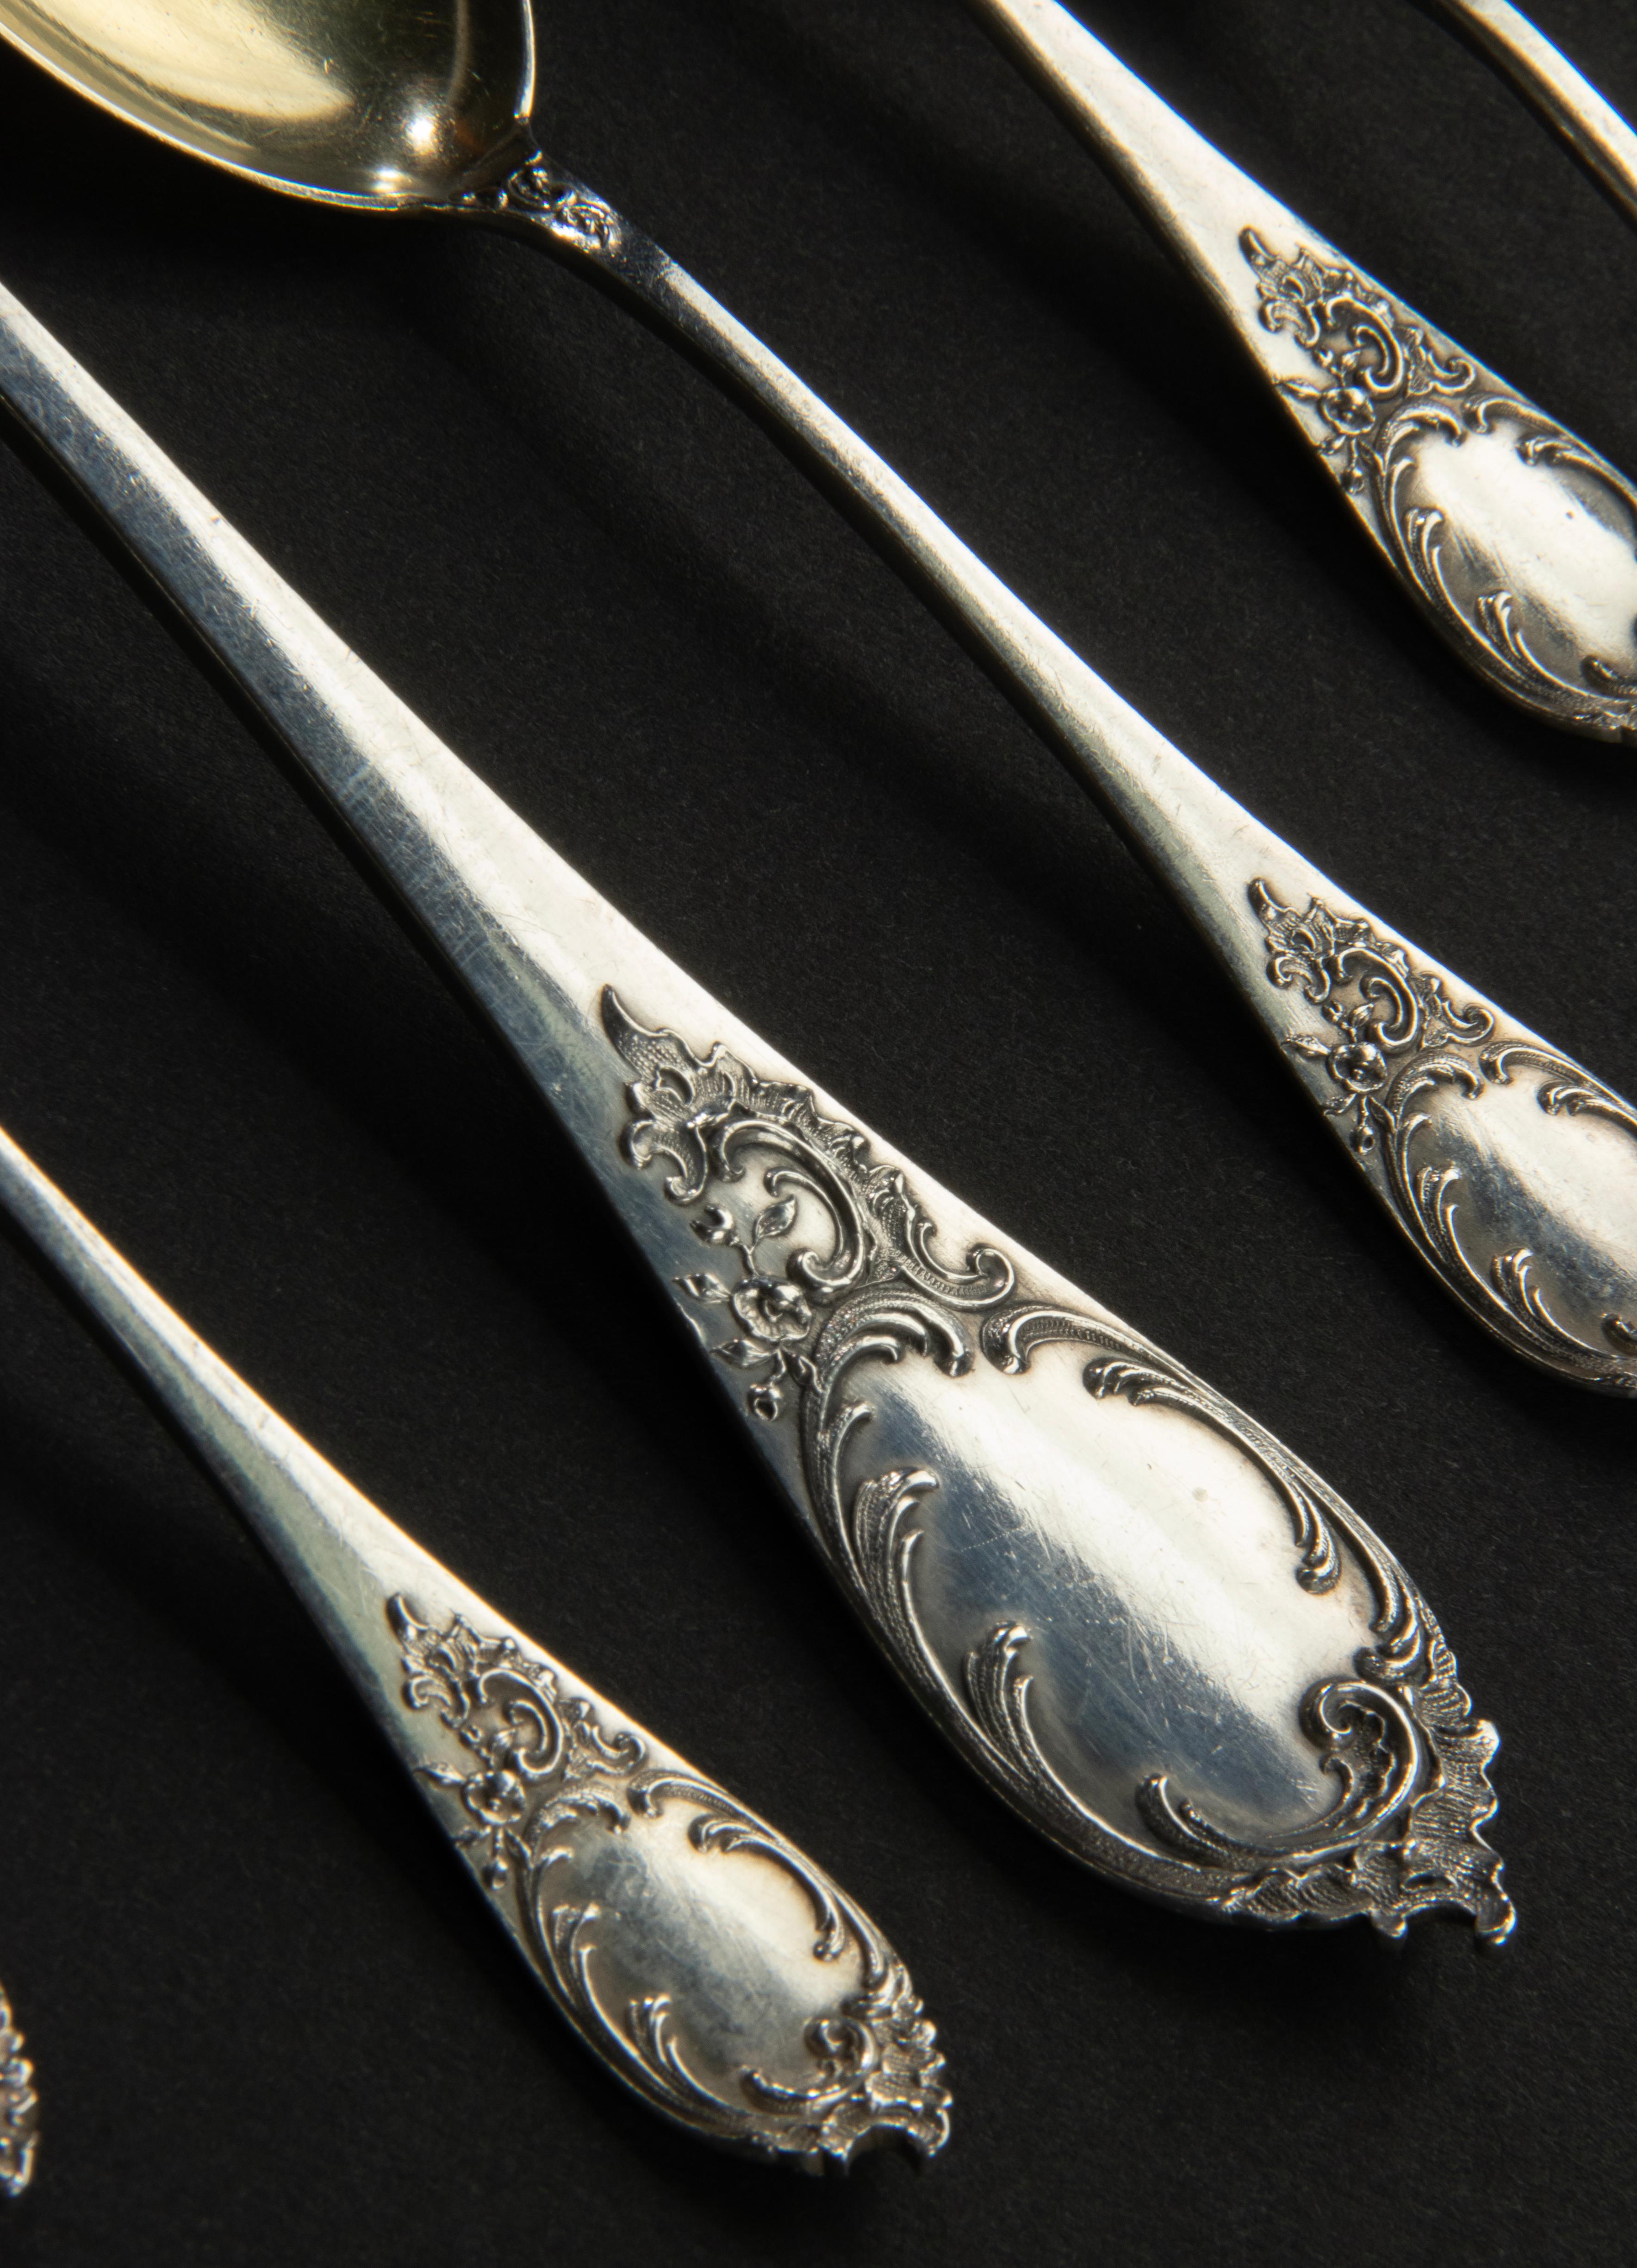 13-Piece Set of Solid Silver Ice Cream Spoons, Late 19th Century For Sale 2